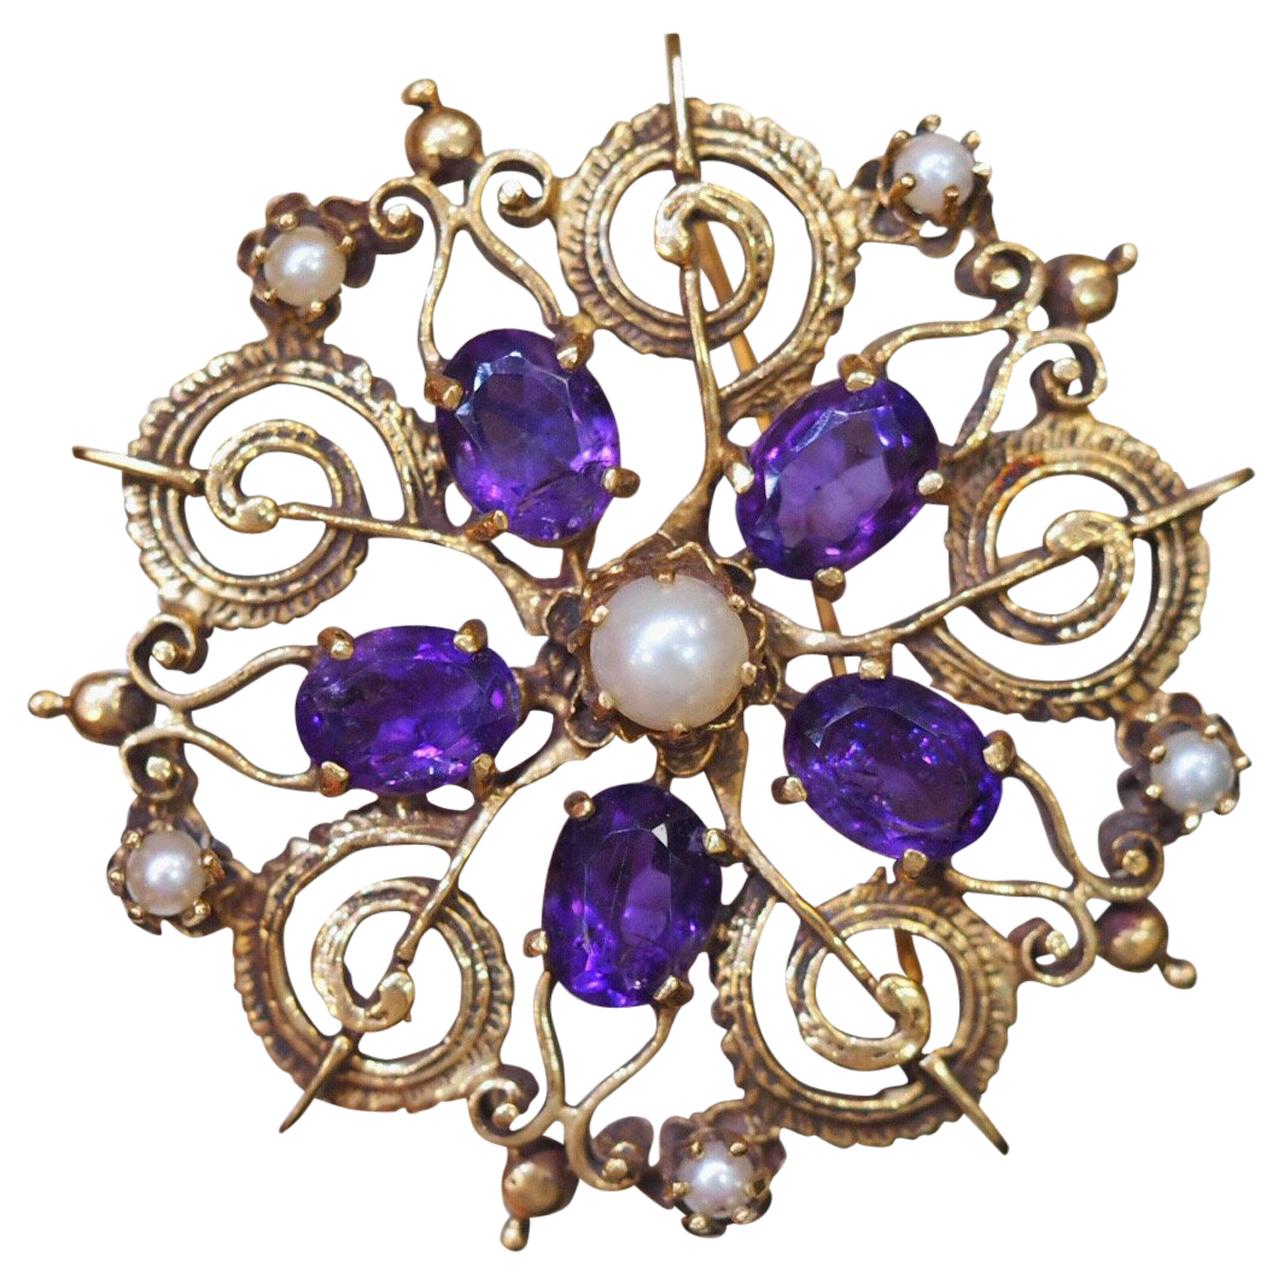 1920s Art Deco Amethyst and Pearl Brooch Pendant